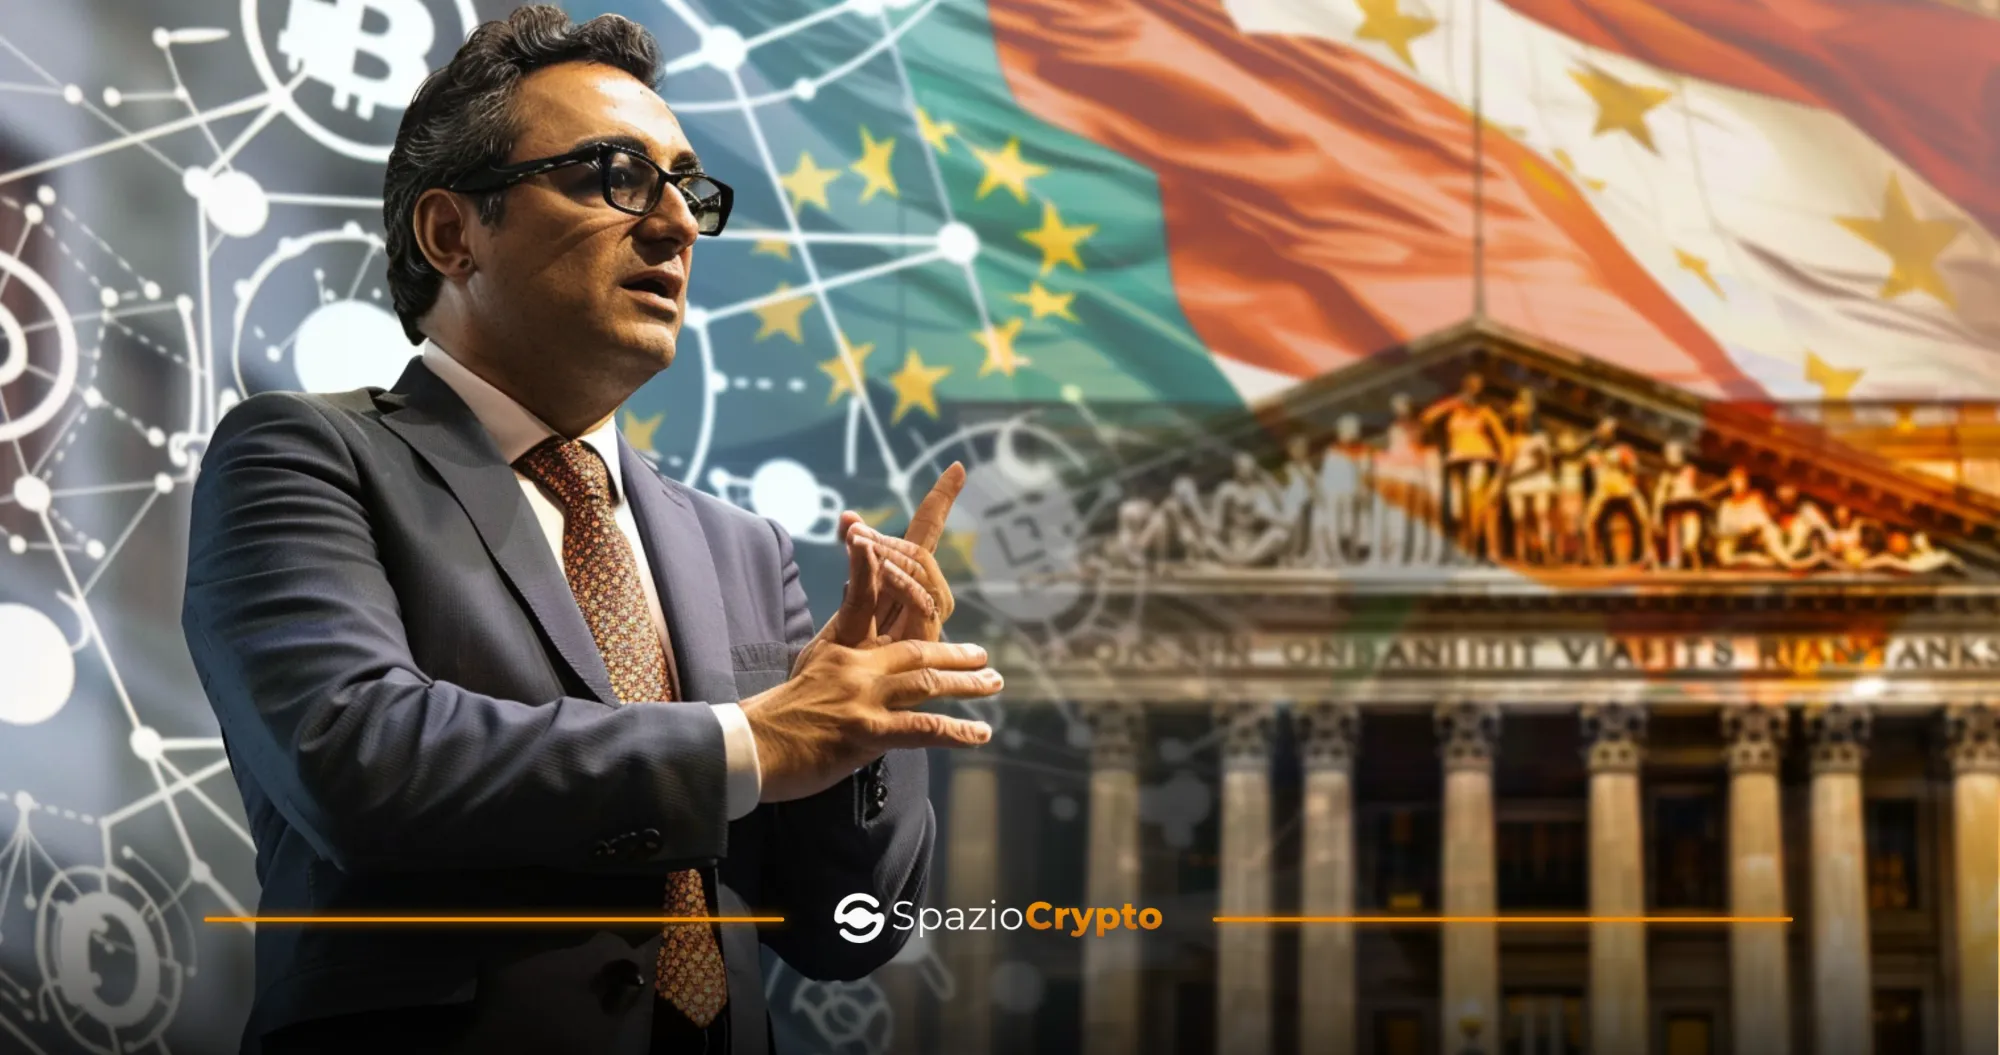 Bank of Italy Cryptocurrency Guidelines Expected In The Next Few Days - Spaziocrypto